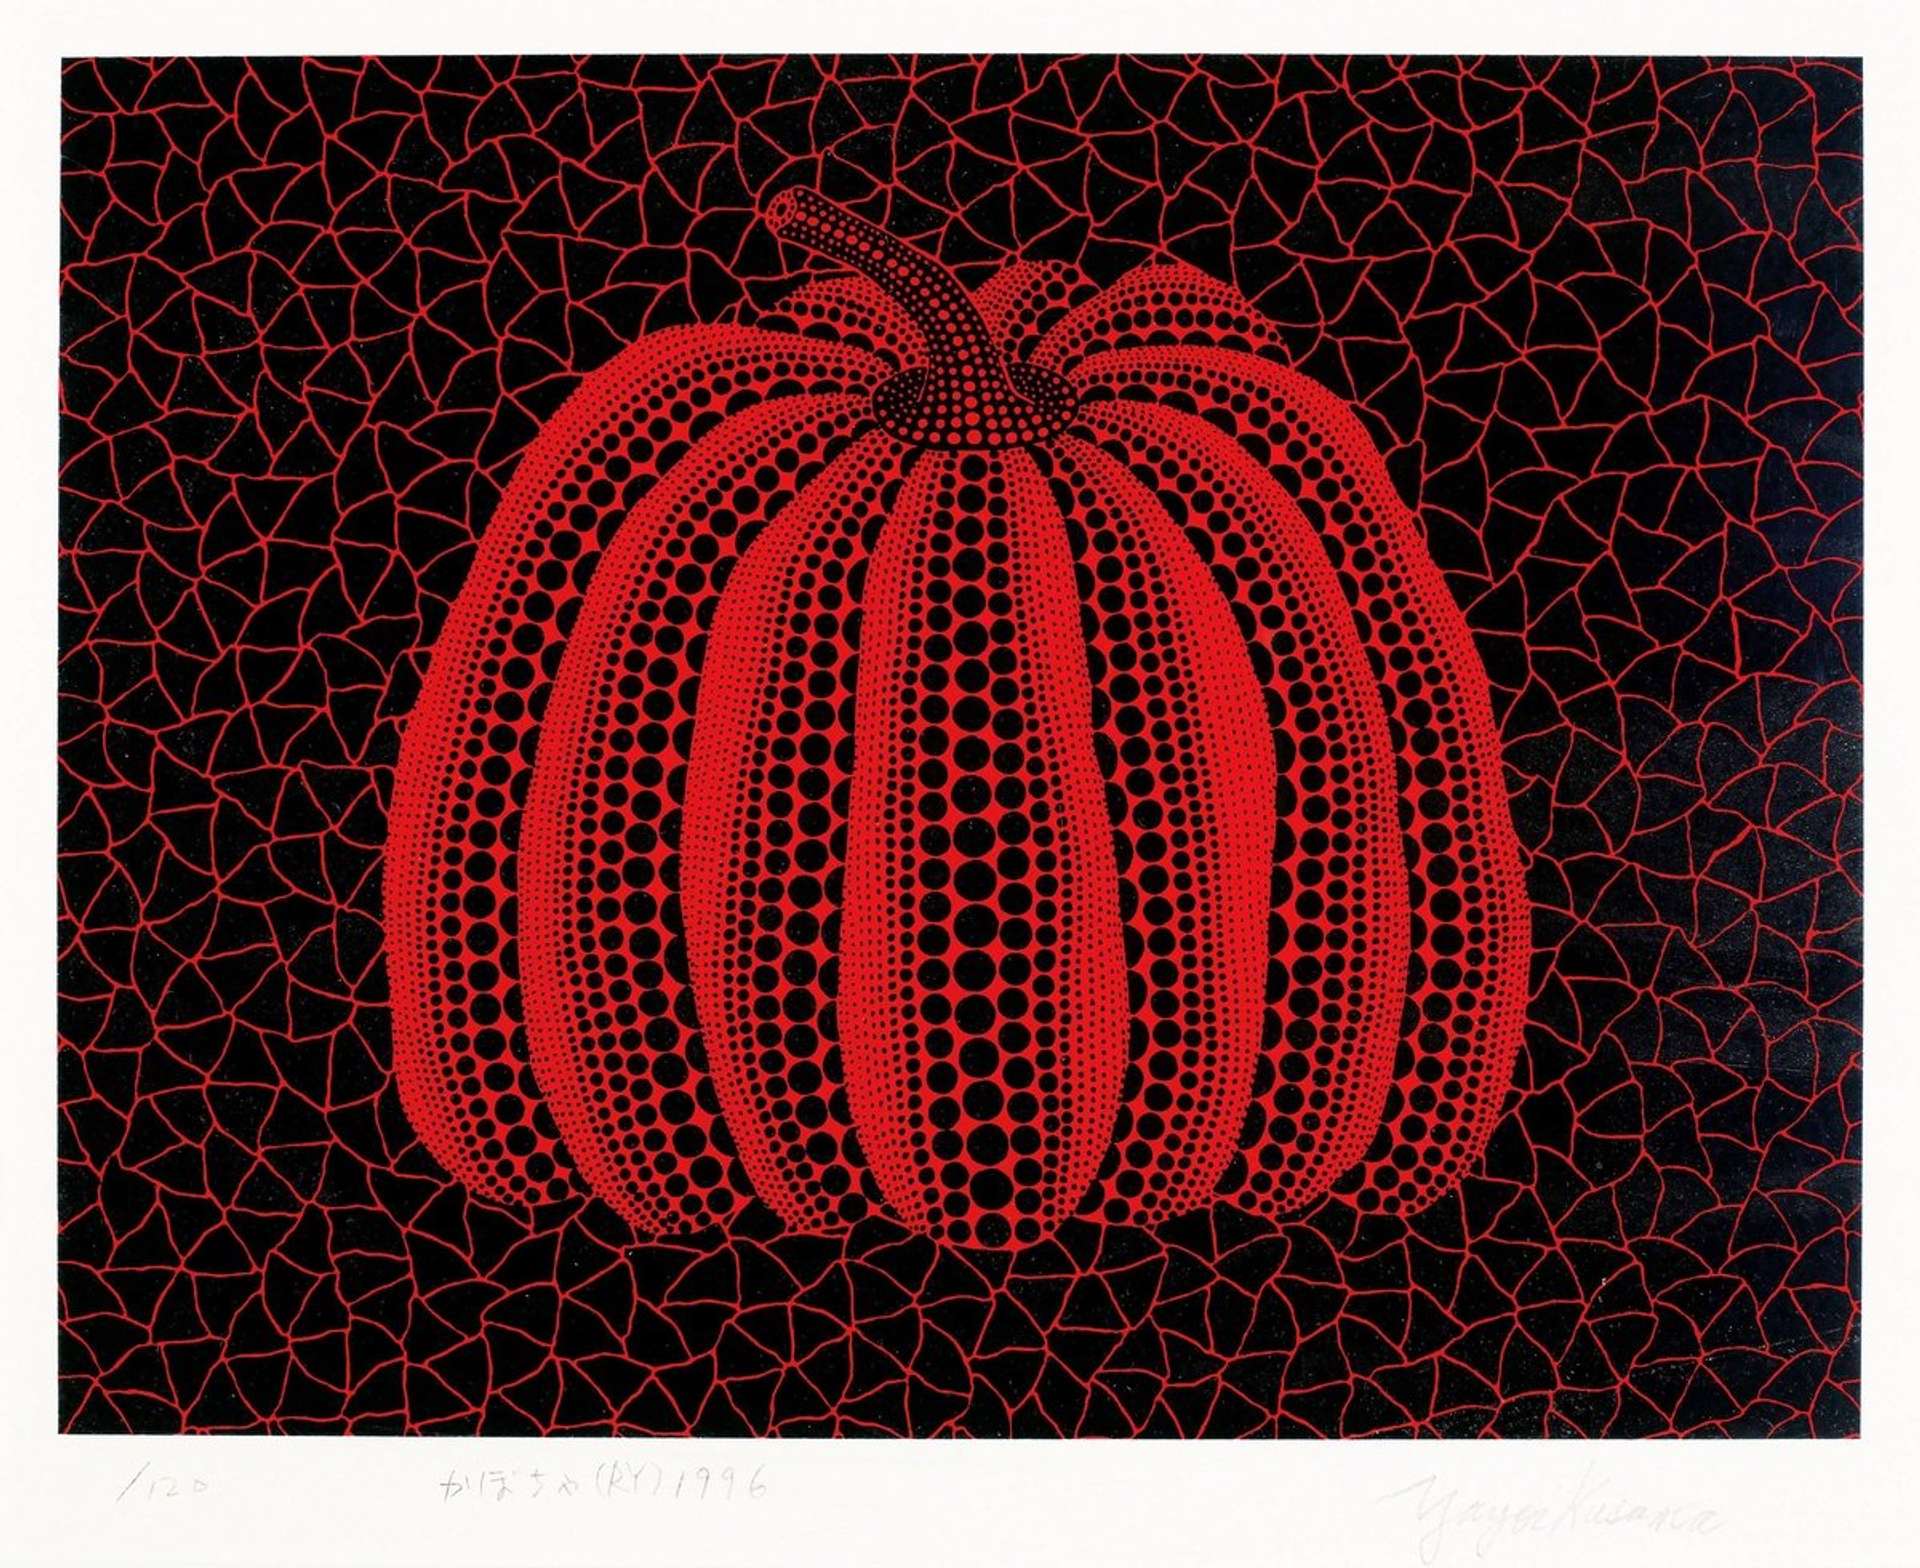 A screenprint by Yayoi Kusama depicting a red pumpkin at the centre of the composition, set against a black background with red triangles. The markings on the pumpkin are delineated with a series of black polkadots.